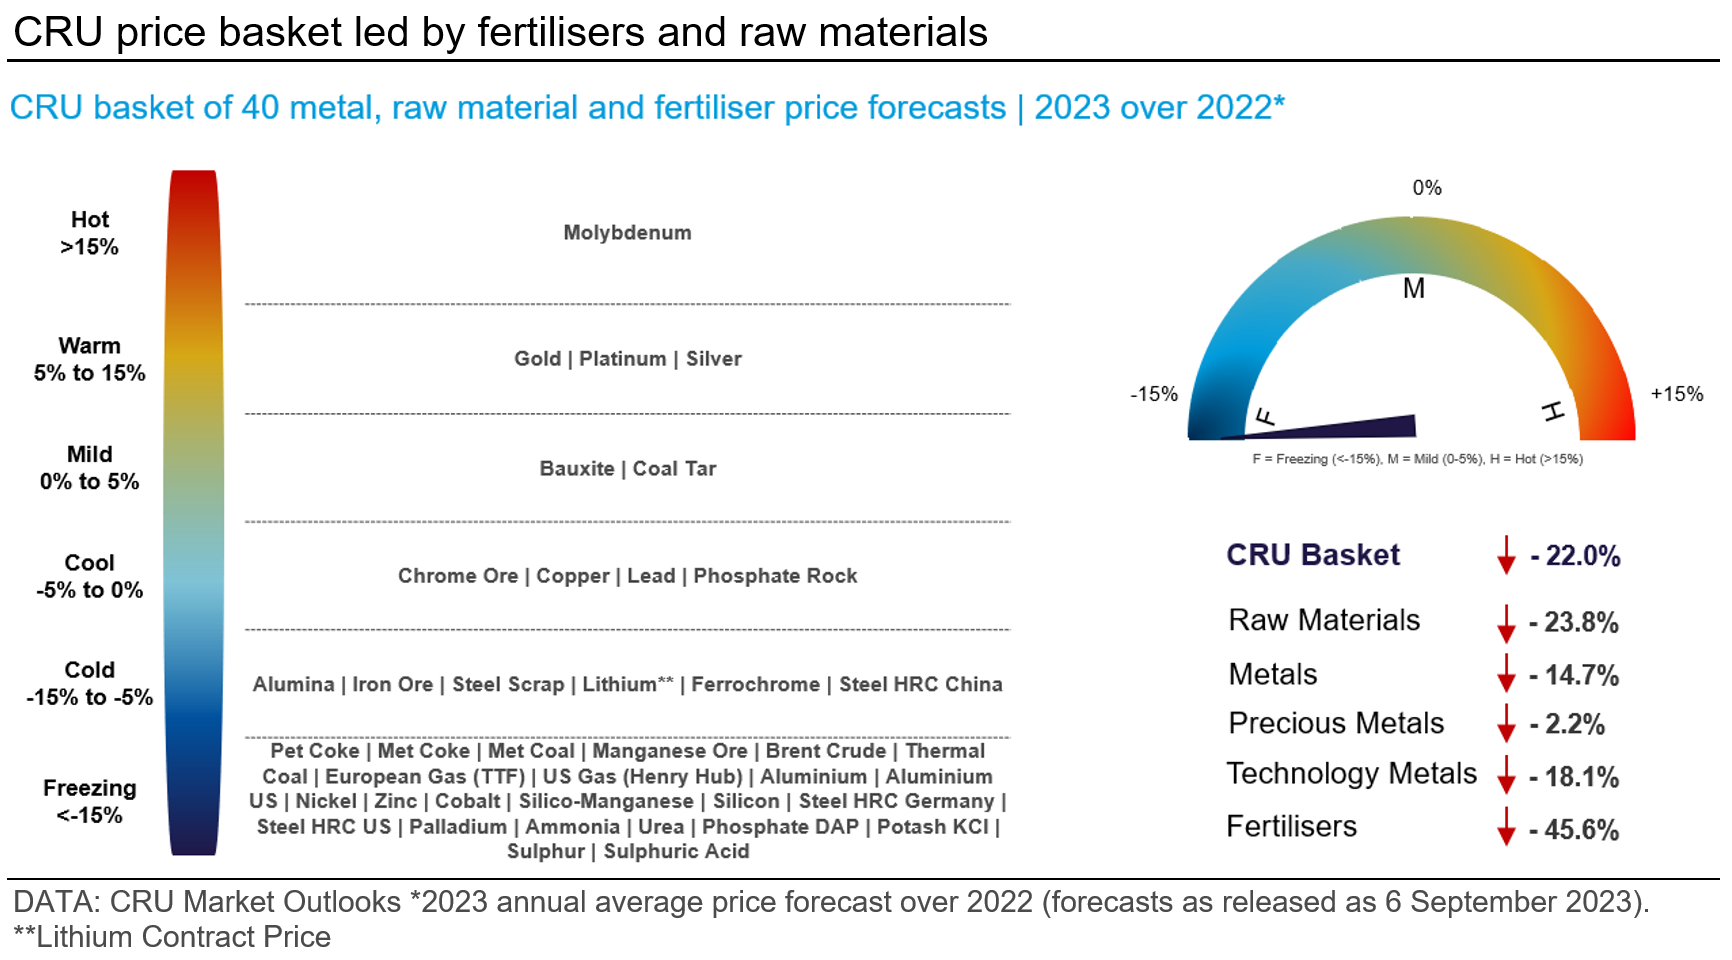 Graph showing CRU price basket led by fertilisers and raw materials